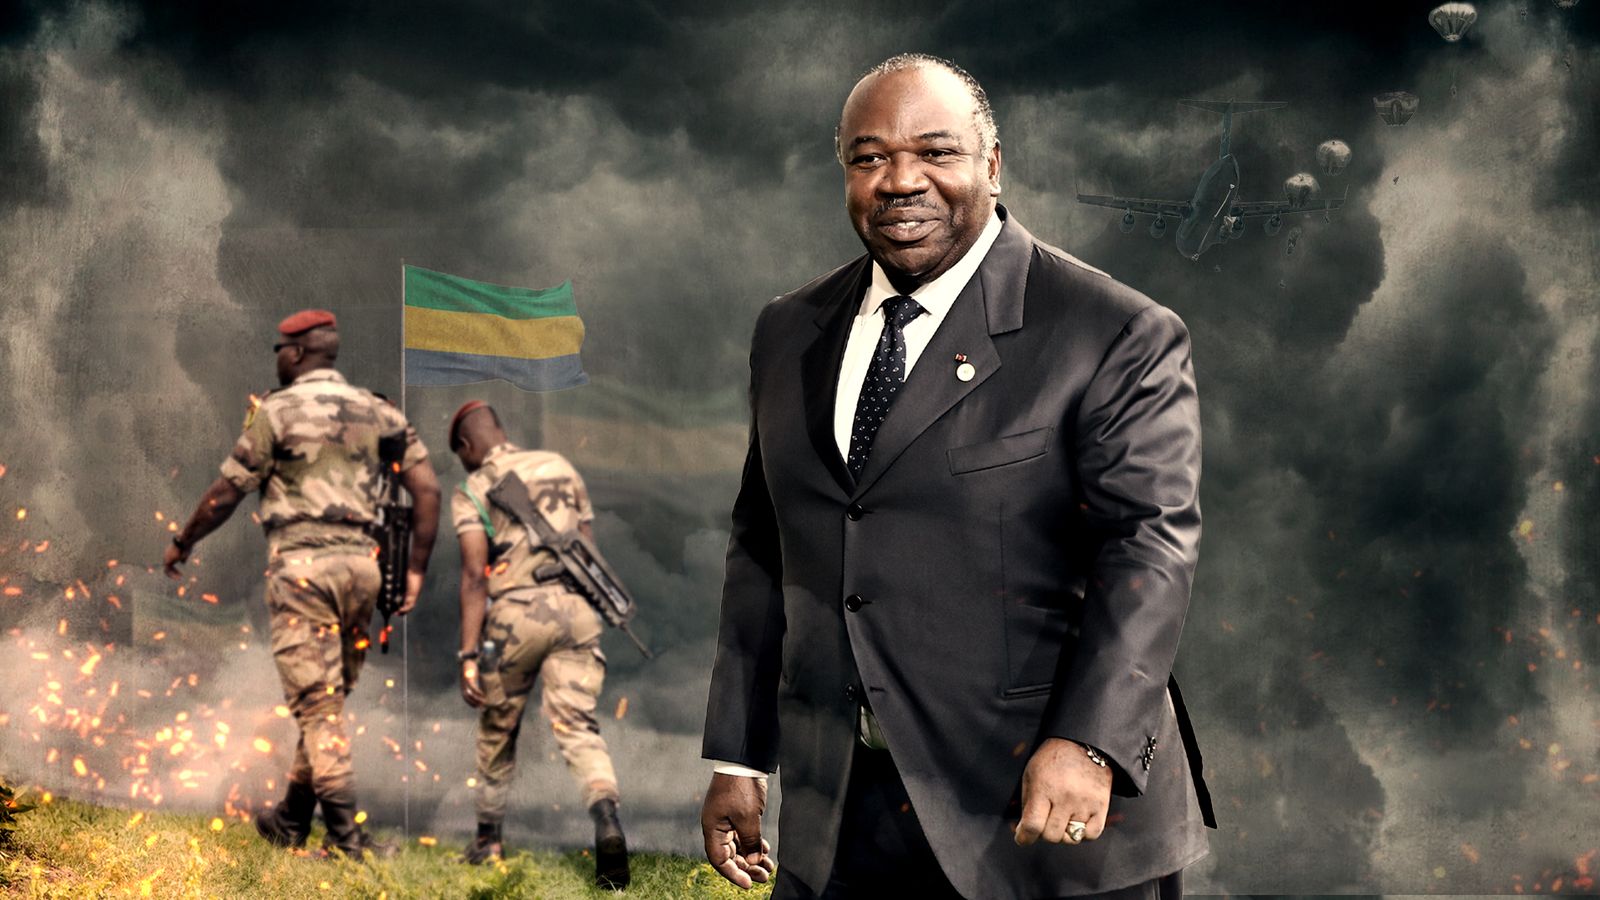 What is happening in Gabon and who is Ali Bongo?